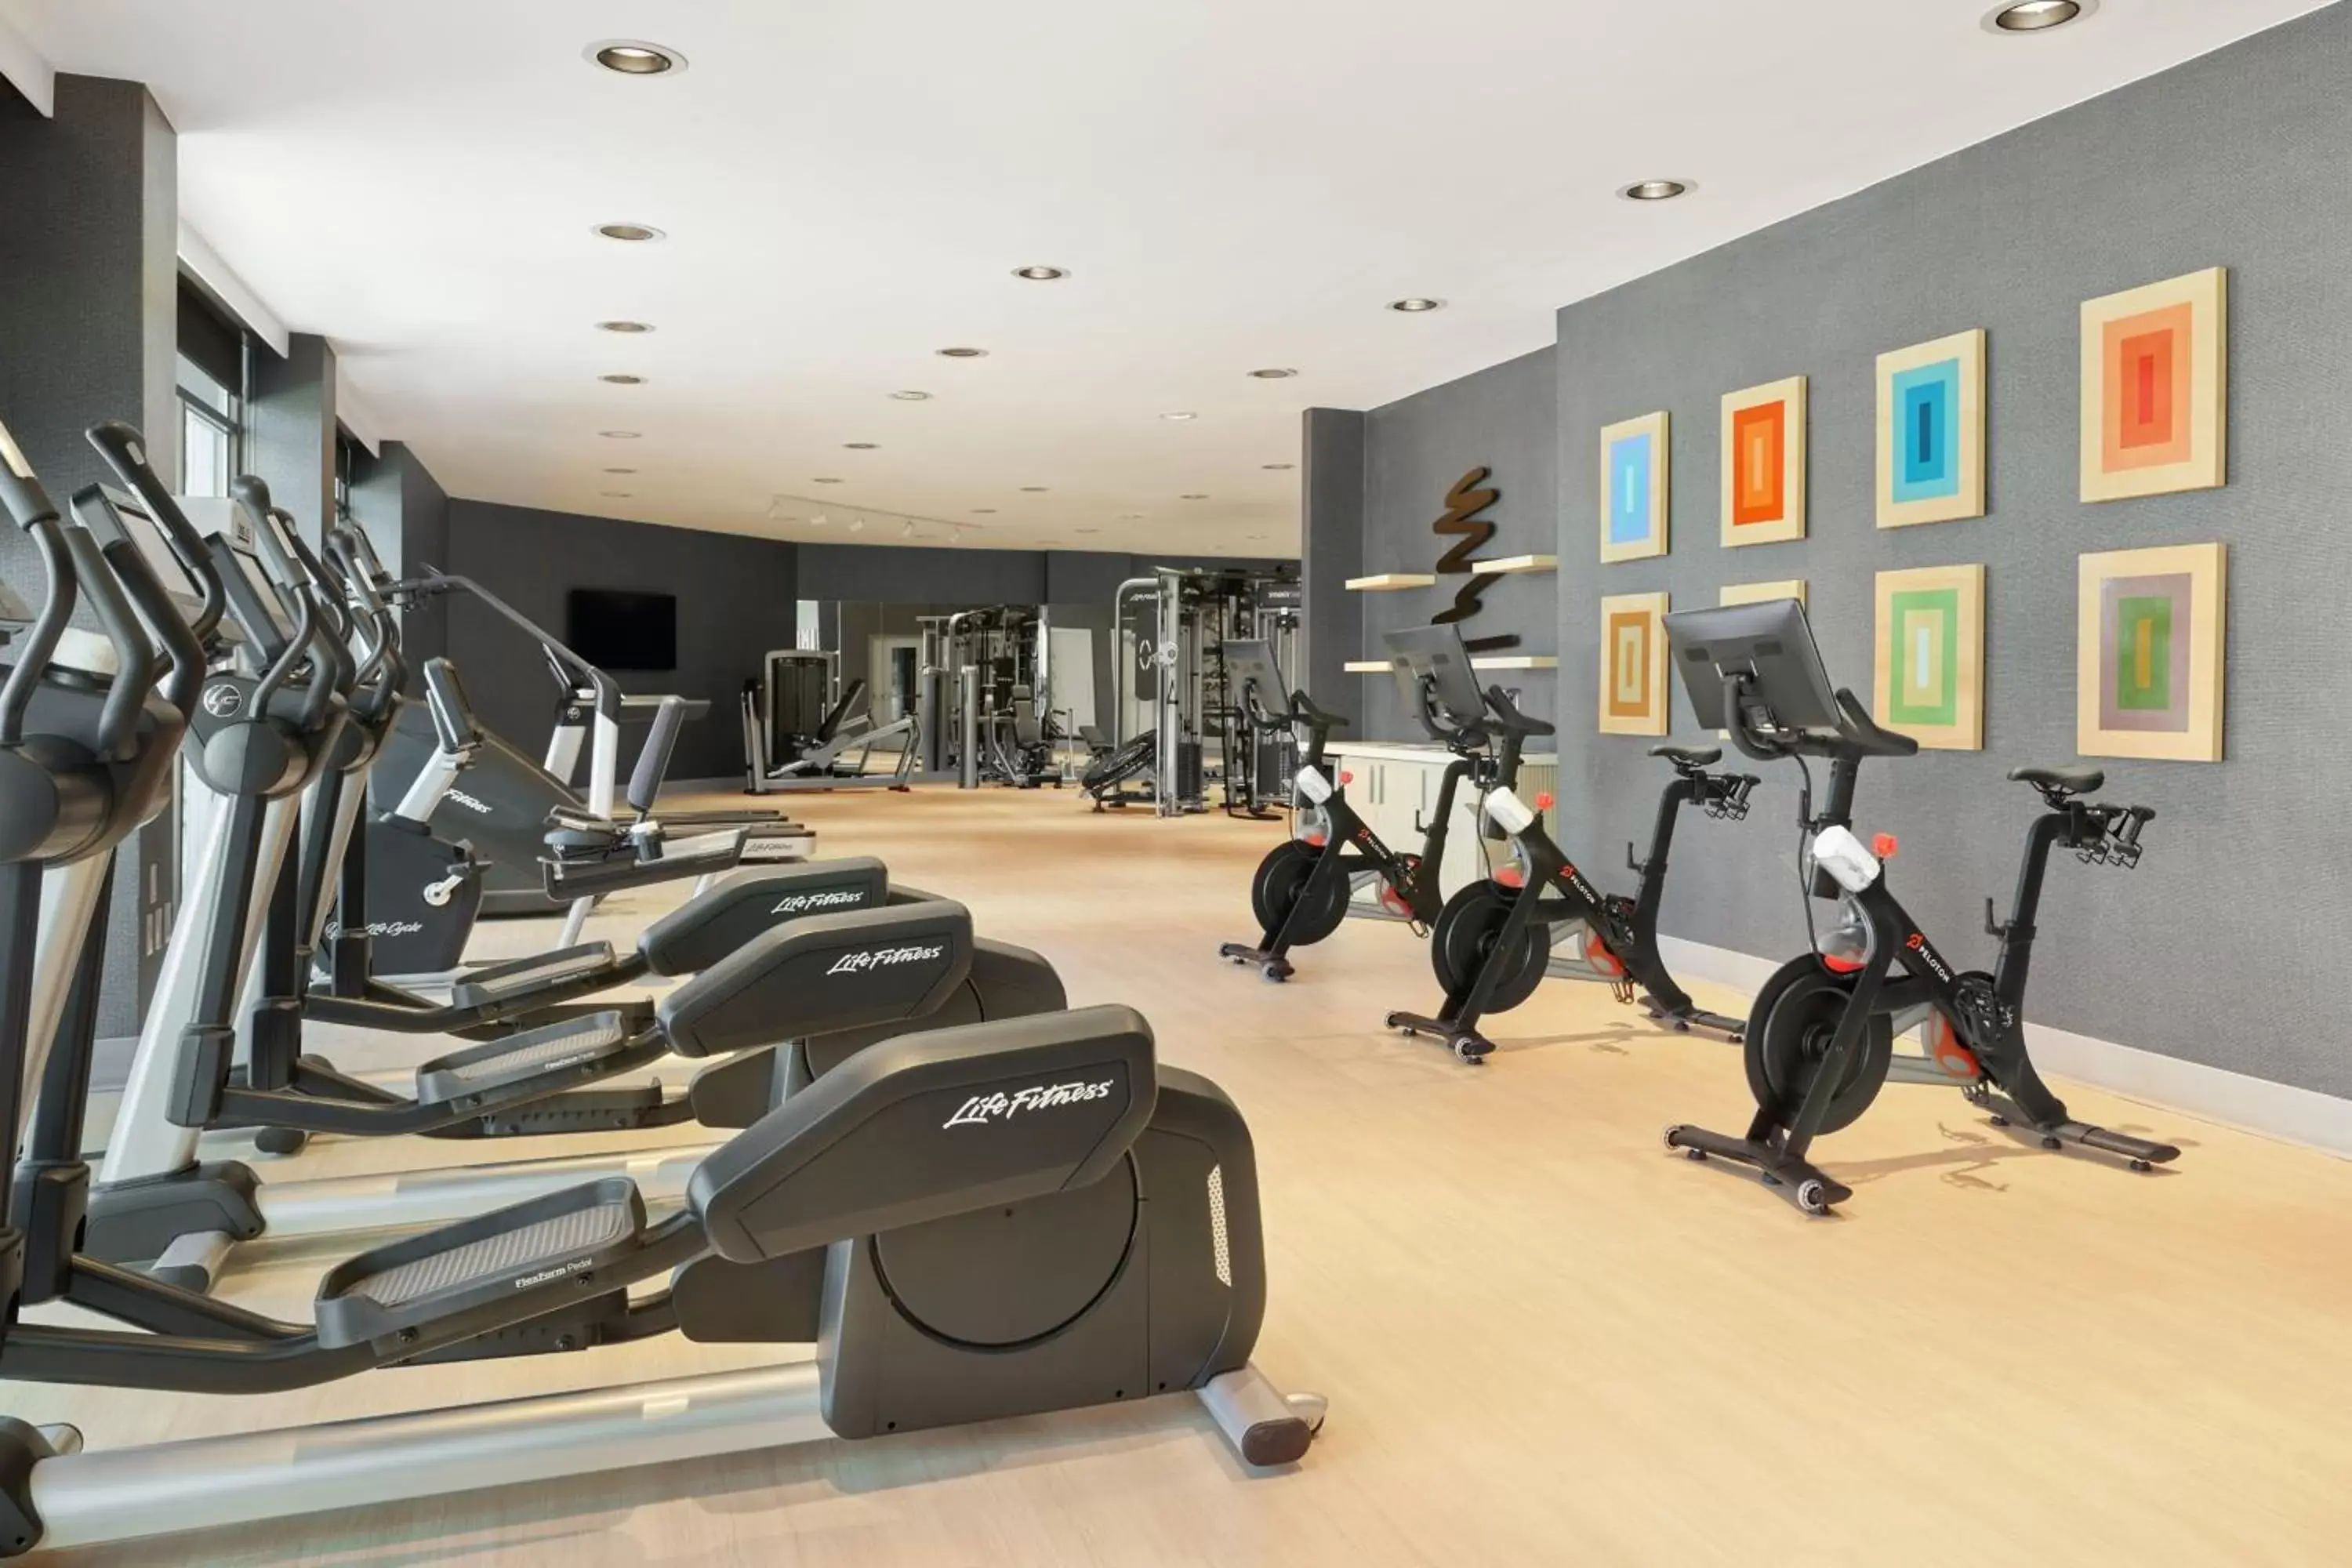 Fitness centre/facilities, Fitness Center/Facilities in Viewline Resort Snowmass, Autograph Collection